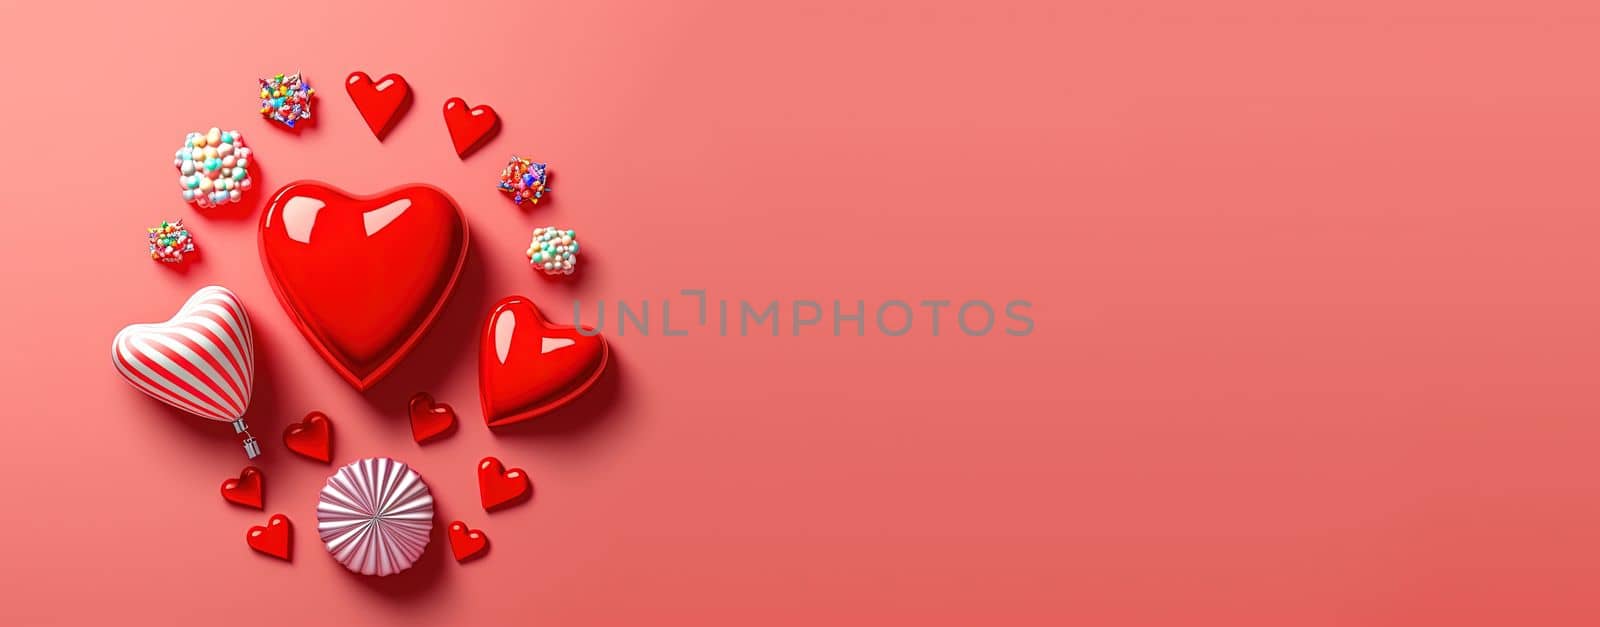 Valentine's Day banner with a striking red 3D heart shape by templator